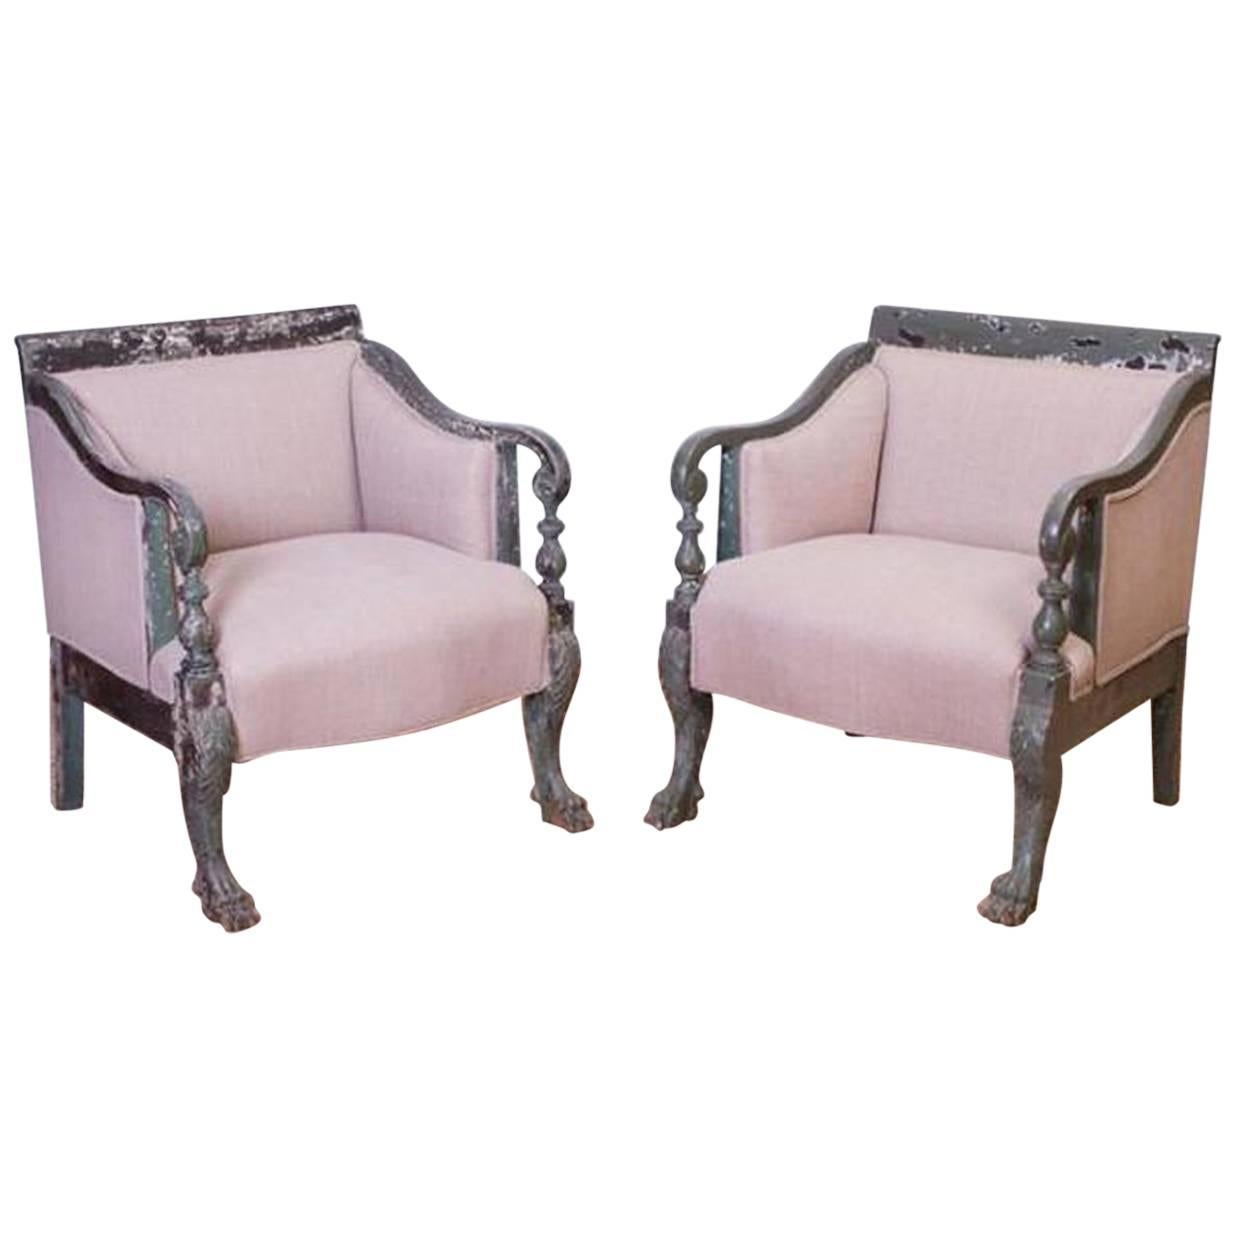 Pair of Empire Revival Style Painted Armchairs